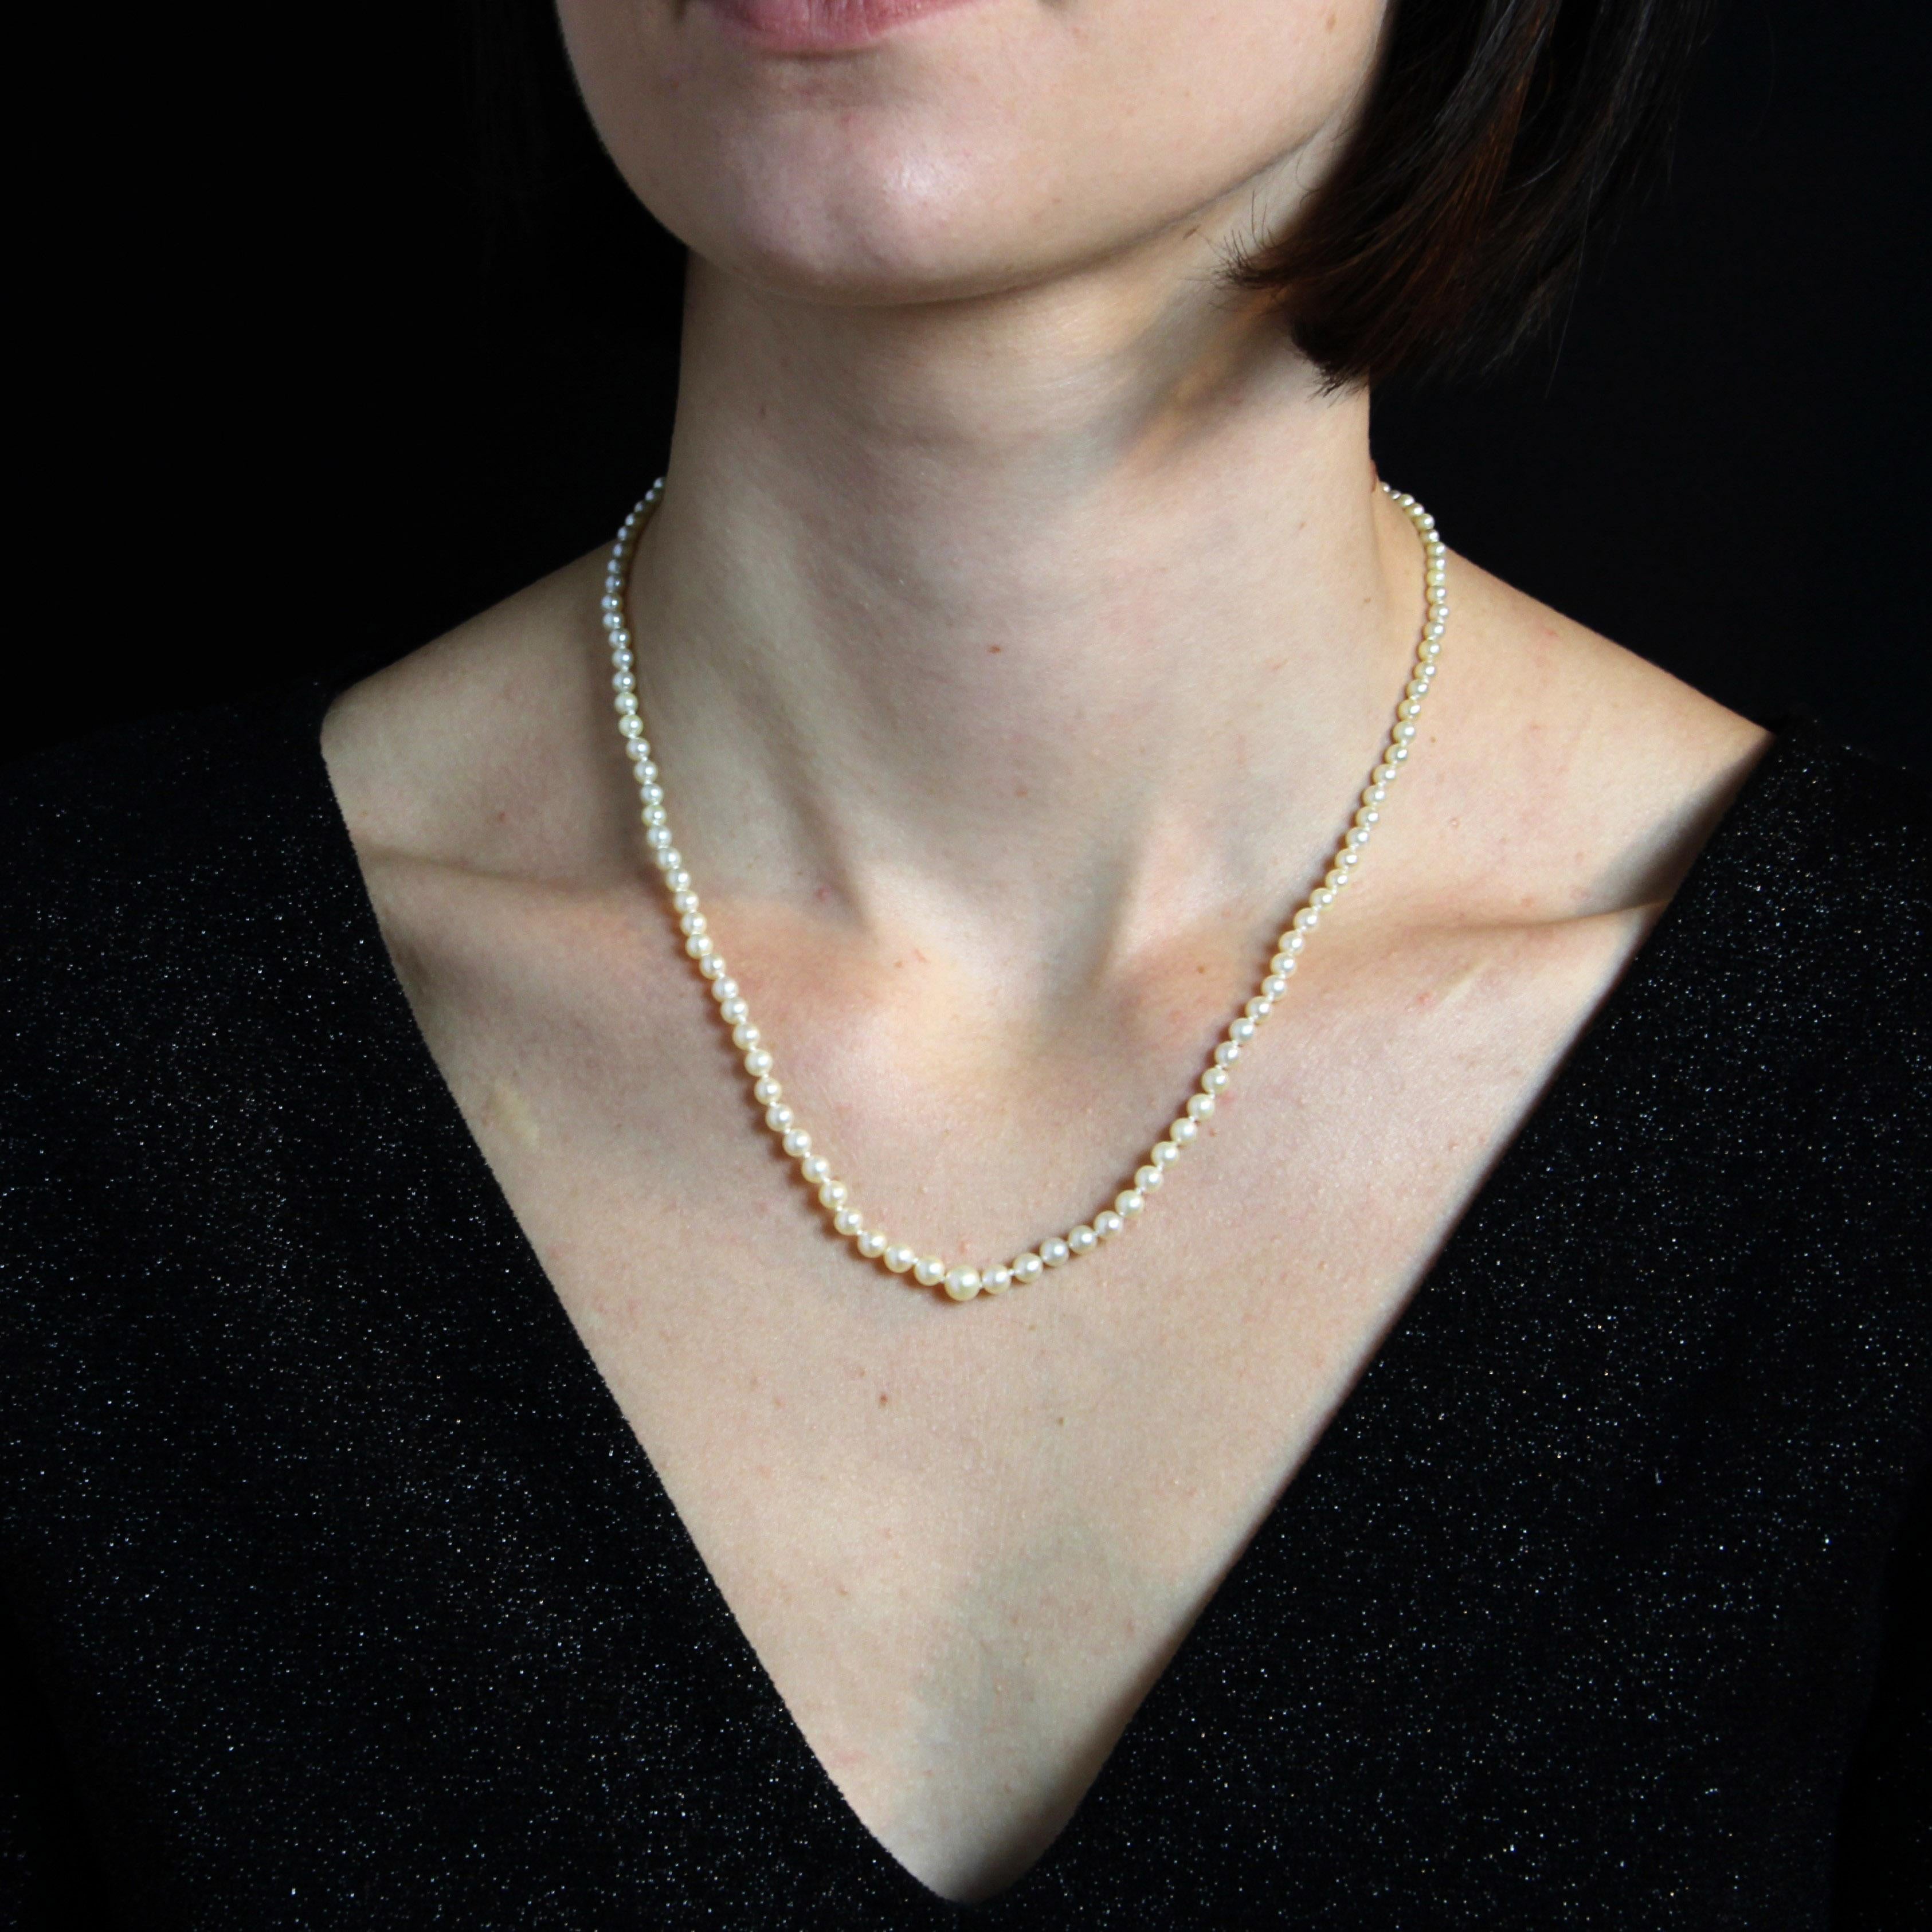 Necklace of creamy pearly orient cultured pearls, opening with an 18K yellow gold clasp, eagle head hallmark.
The pearls on this necklace are drop-shaped : the center pearl is larger and their size reduces to the clasp.
Diameter of the pearls :